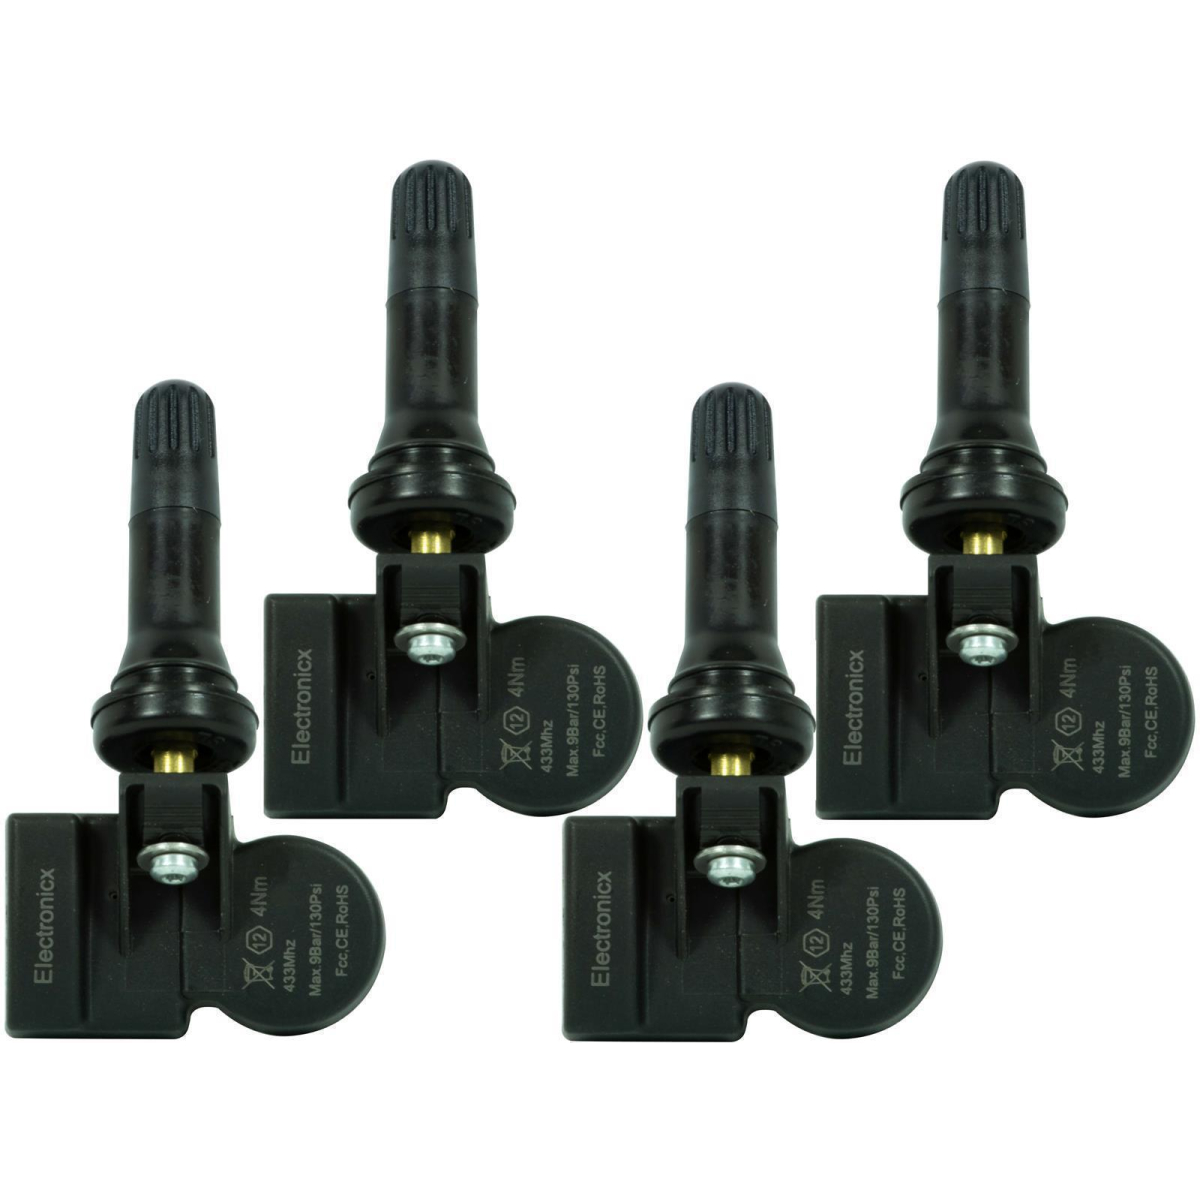 4x RDKS TPMS tire pressure sensors rubber valve for Jeep Compass Chrysler Pacifica